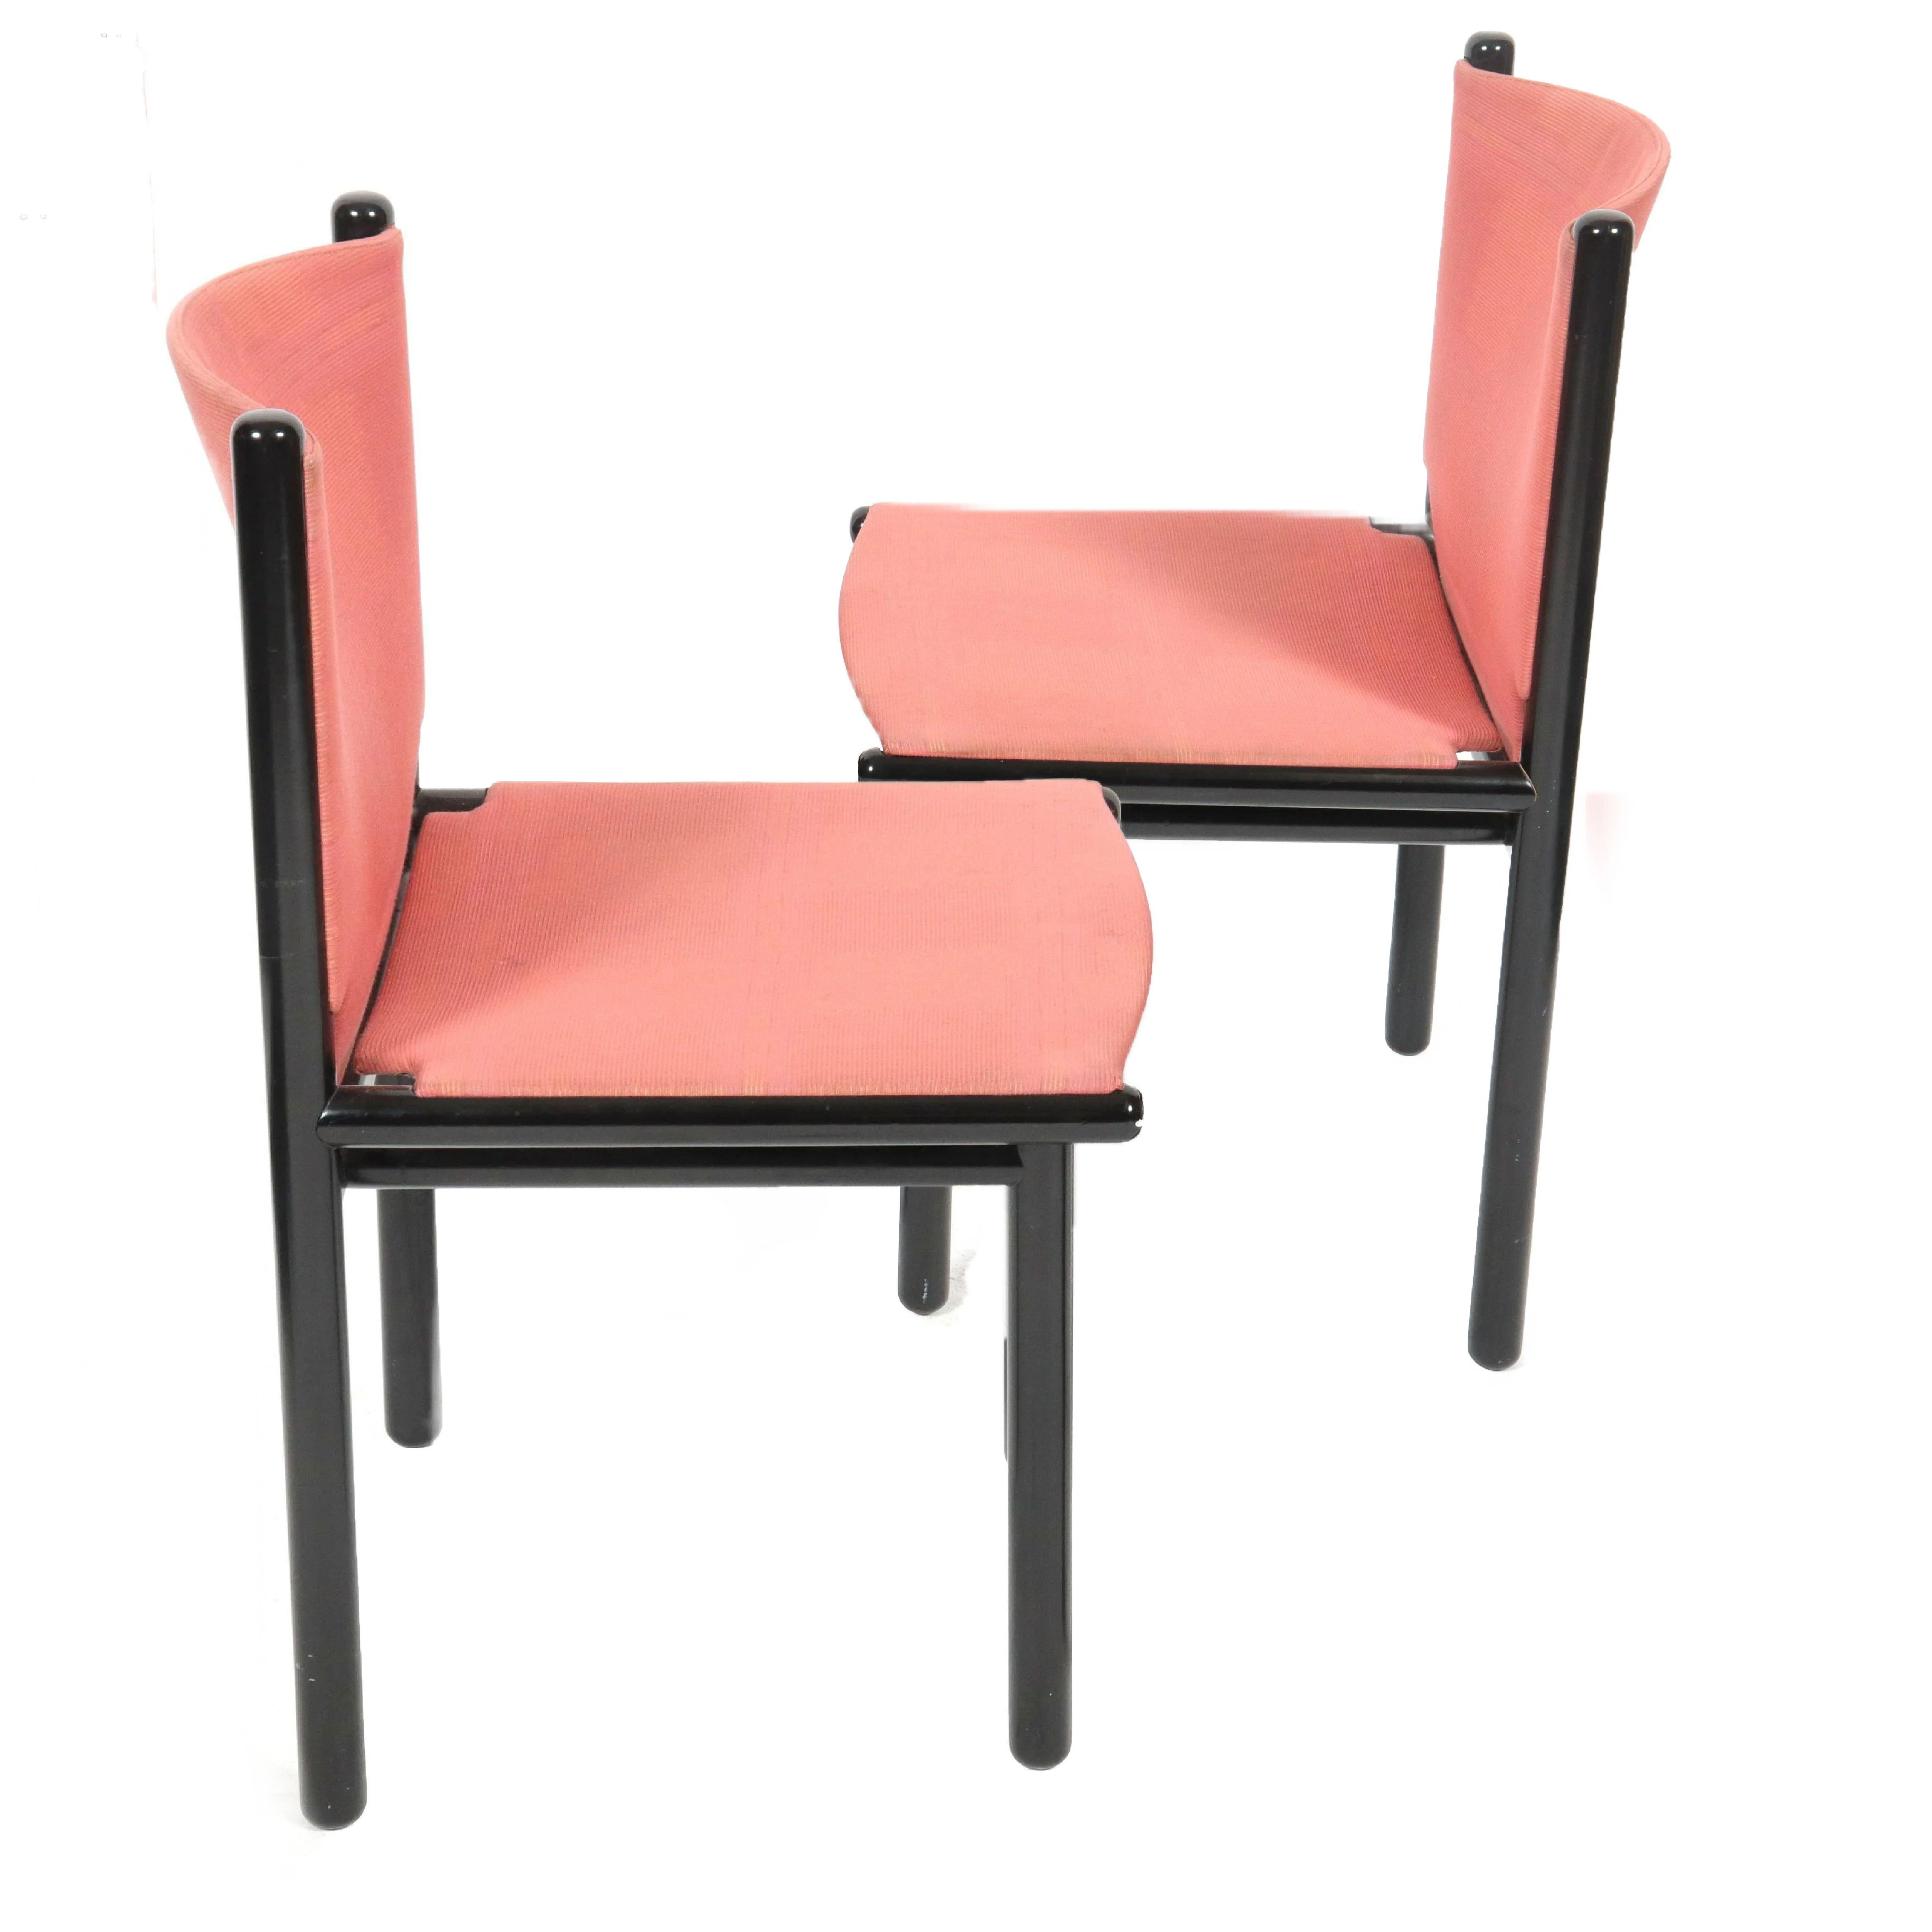 Cassina Caprile dining chair by Gianfranco Frattini. Gorgeous original woven textile with shades of pink and peach. Lovely lacquered wood frame. Labeled. Gianfranco Frattini realized this design after working on the Hilton Tokyo project in Japan.